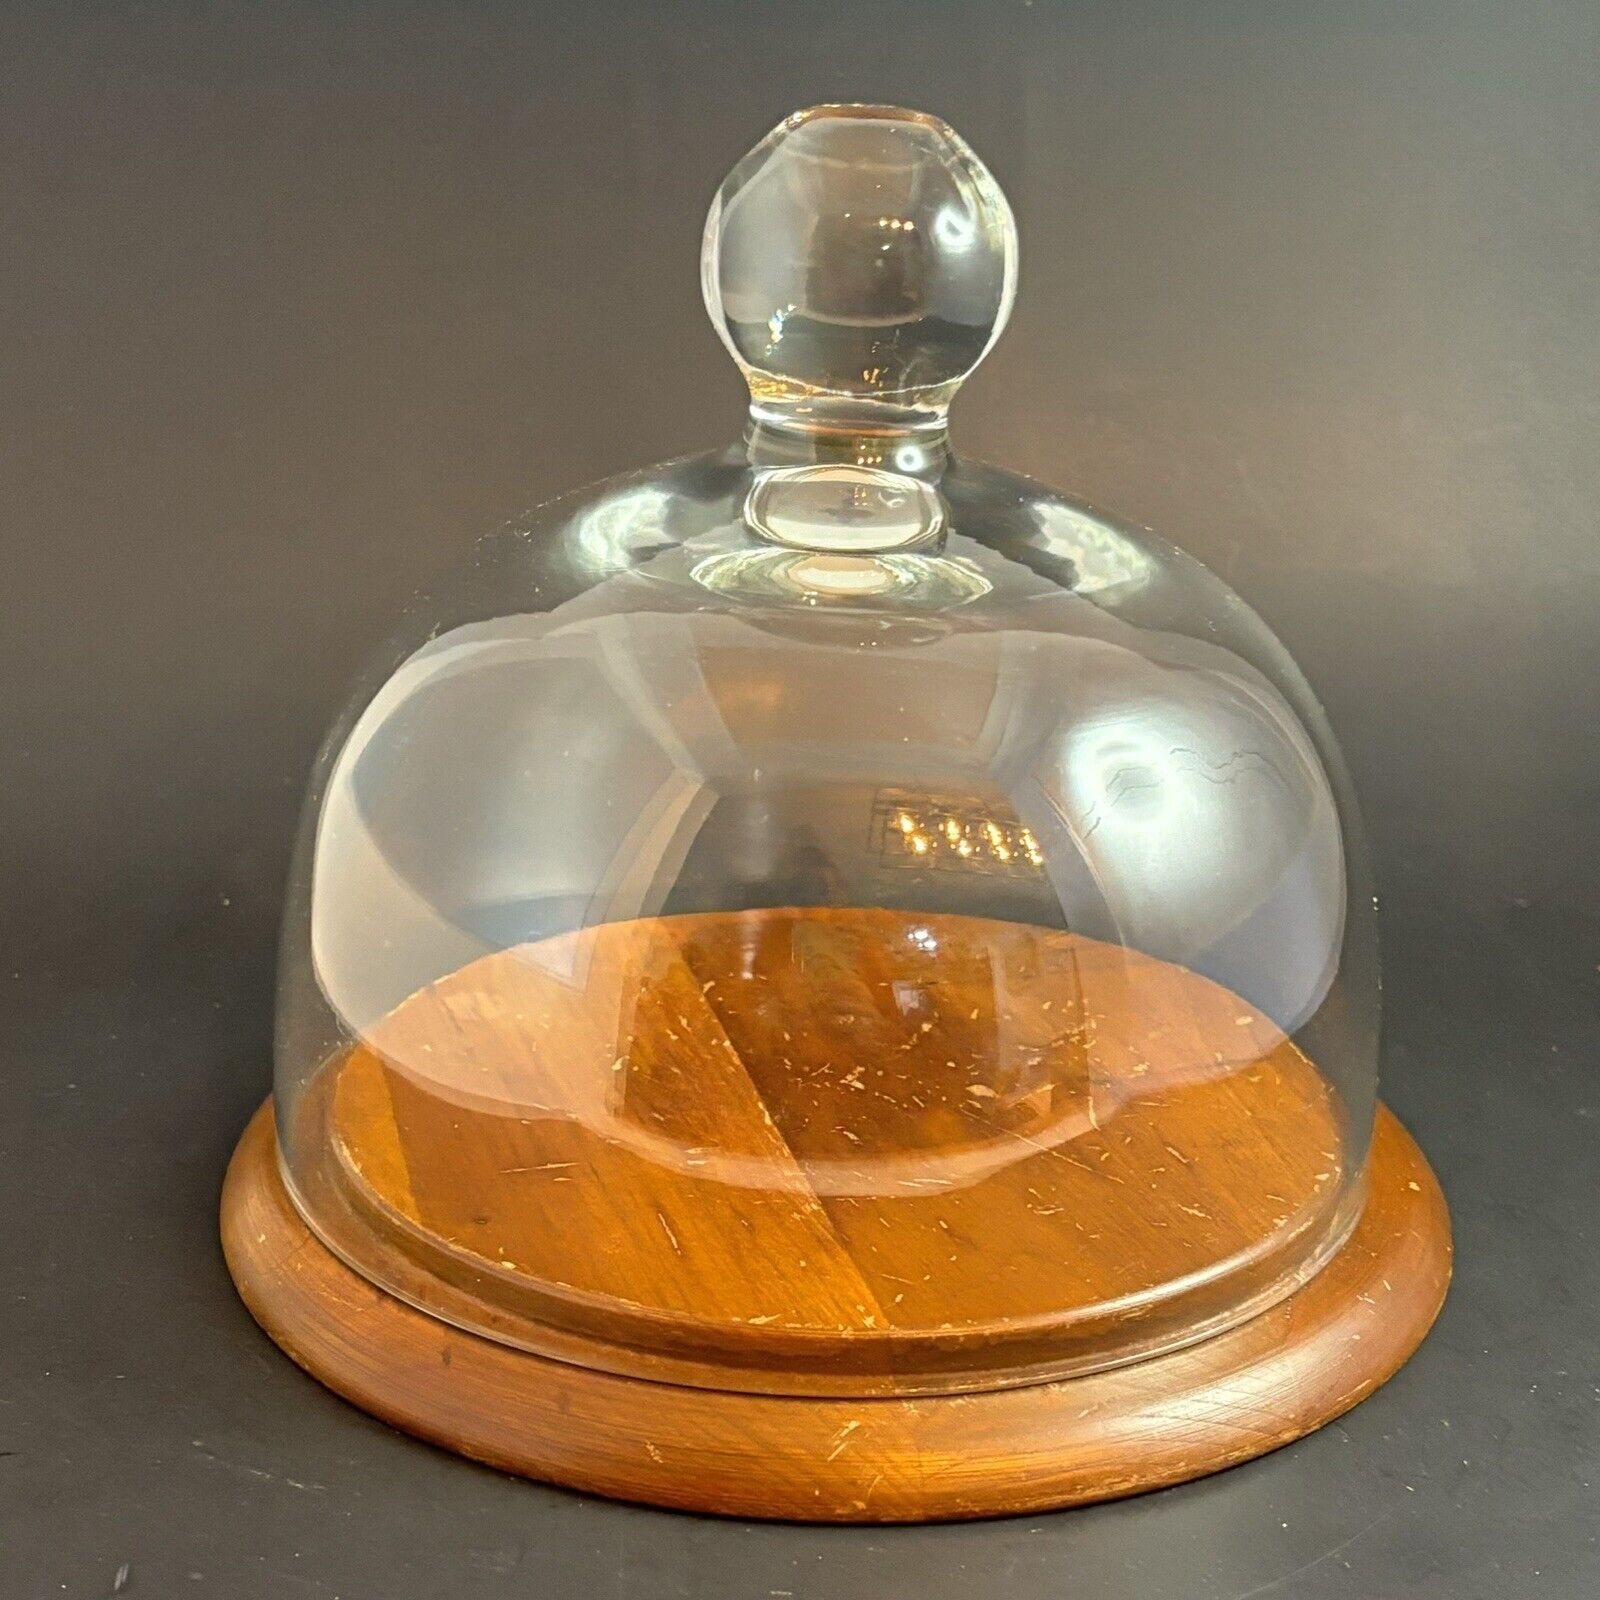 Glass Dome Cloche With Wooden Base Vintage Cheese Board Cake Pastry Dish